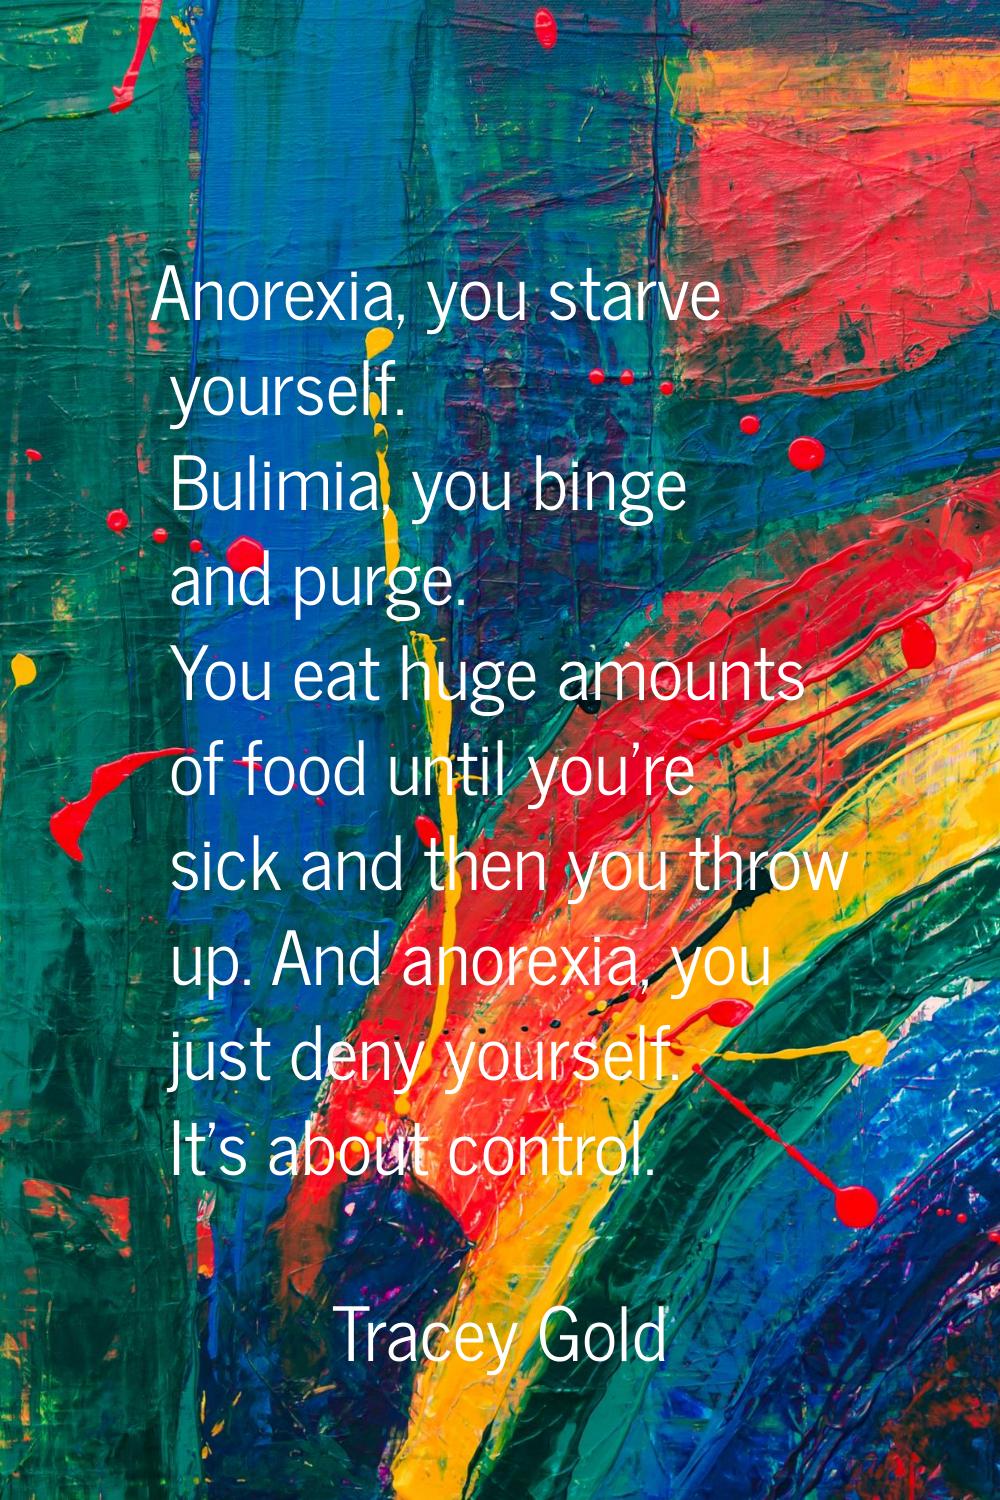 Anorexia, you starve yourself. Bulimia, you binge and purge. You eat huge amounts of food until you